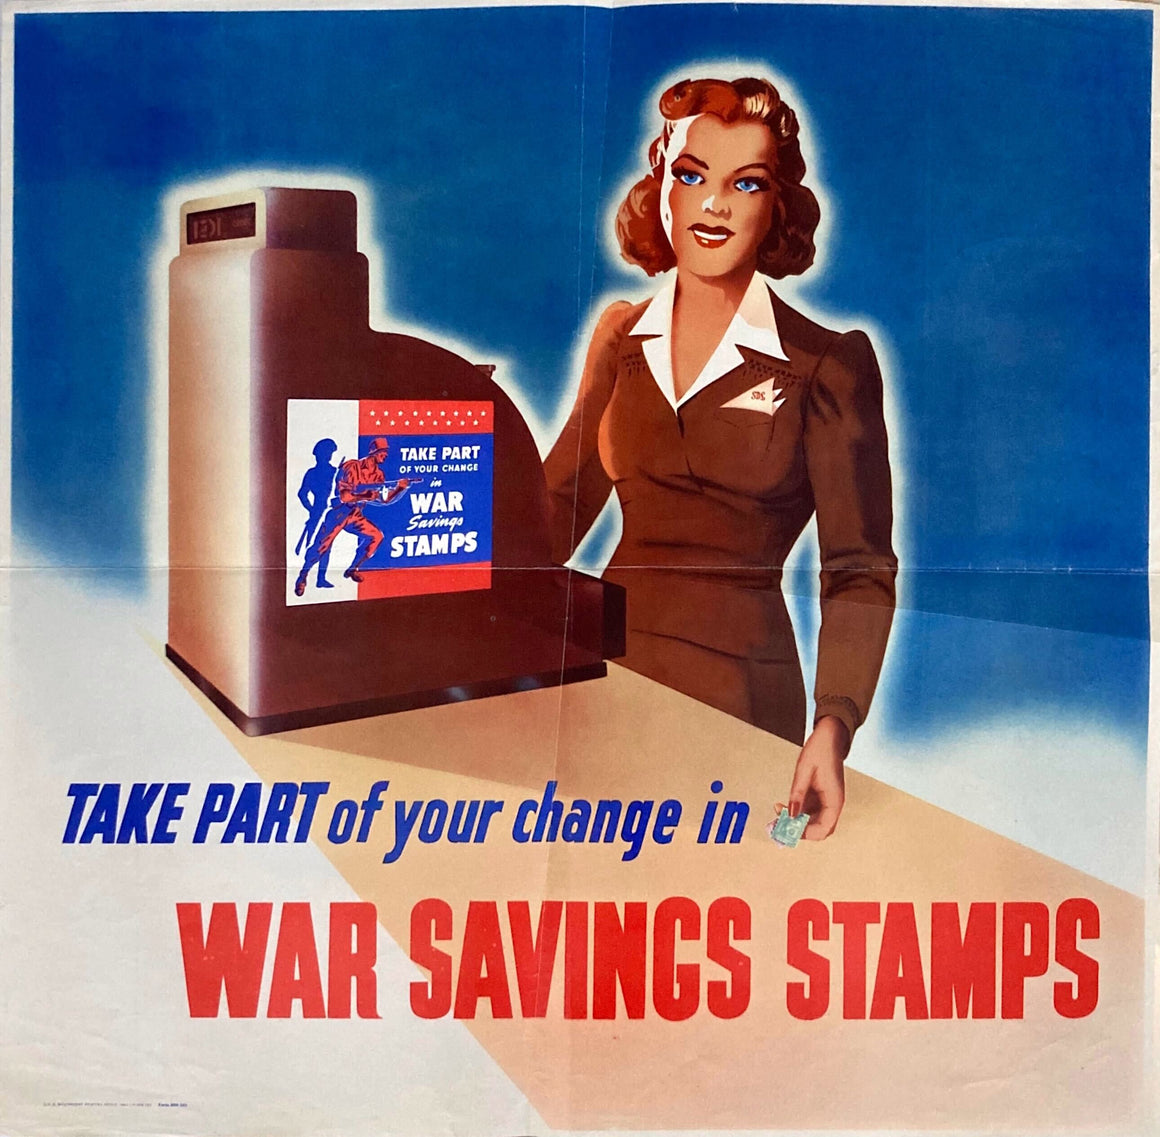 "Take Part of your change in War Savings Stamps" Vintage WWII Poster, 1942